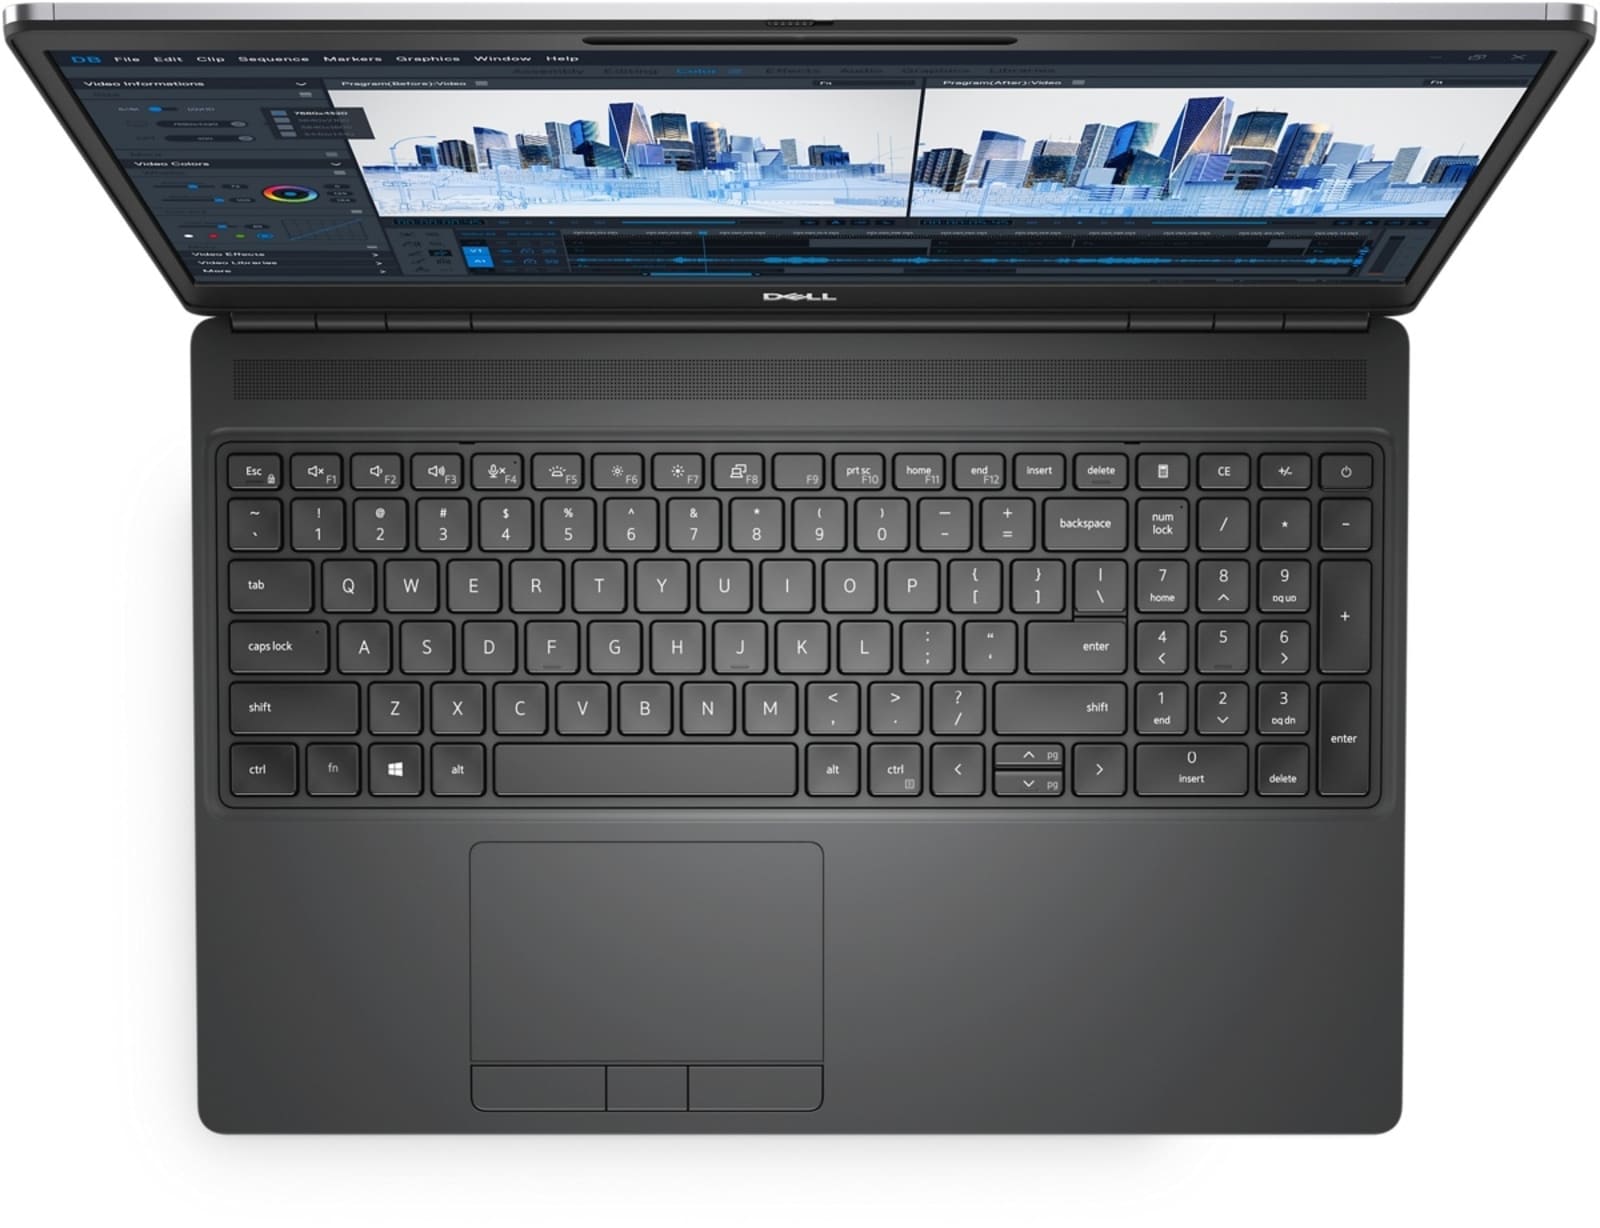 Restored Dell Precision 7000 7560 Workstation Laptop (2021) | 15.6" FHD | Core i5 - 512GB SSD - 64GB RAM - Nvidia T1200 | 6 Cores @ 4.6 GHz - 11th Gen CPU (Refurbished) - image 5 of 11